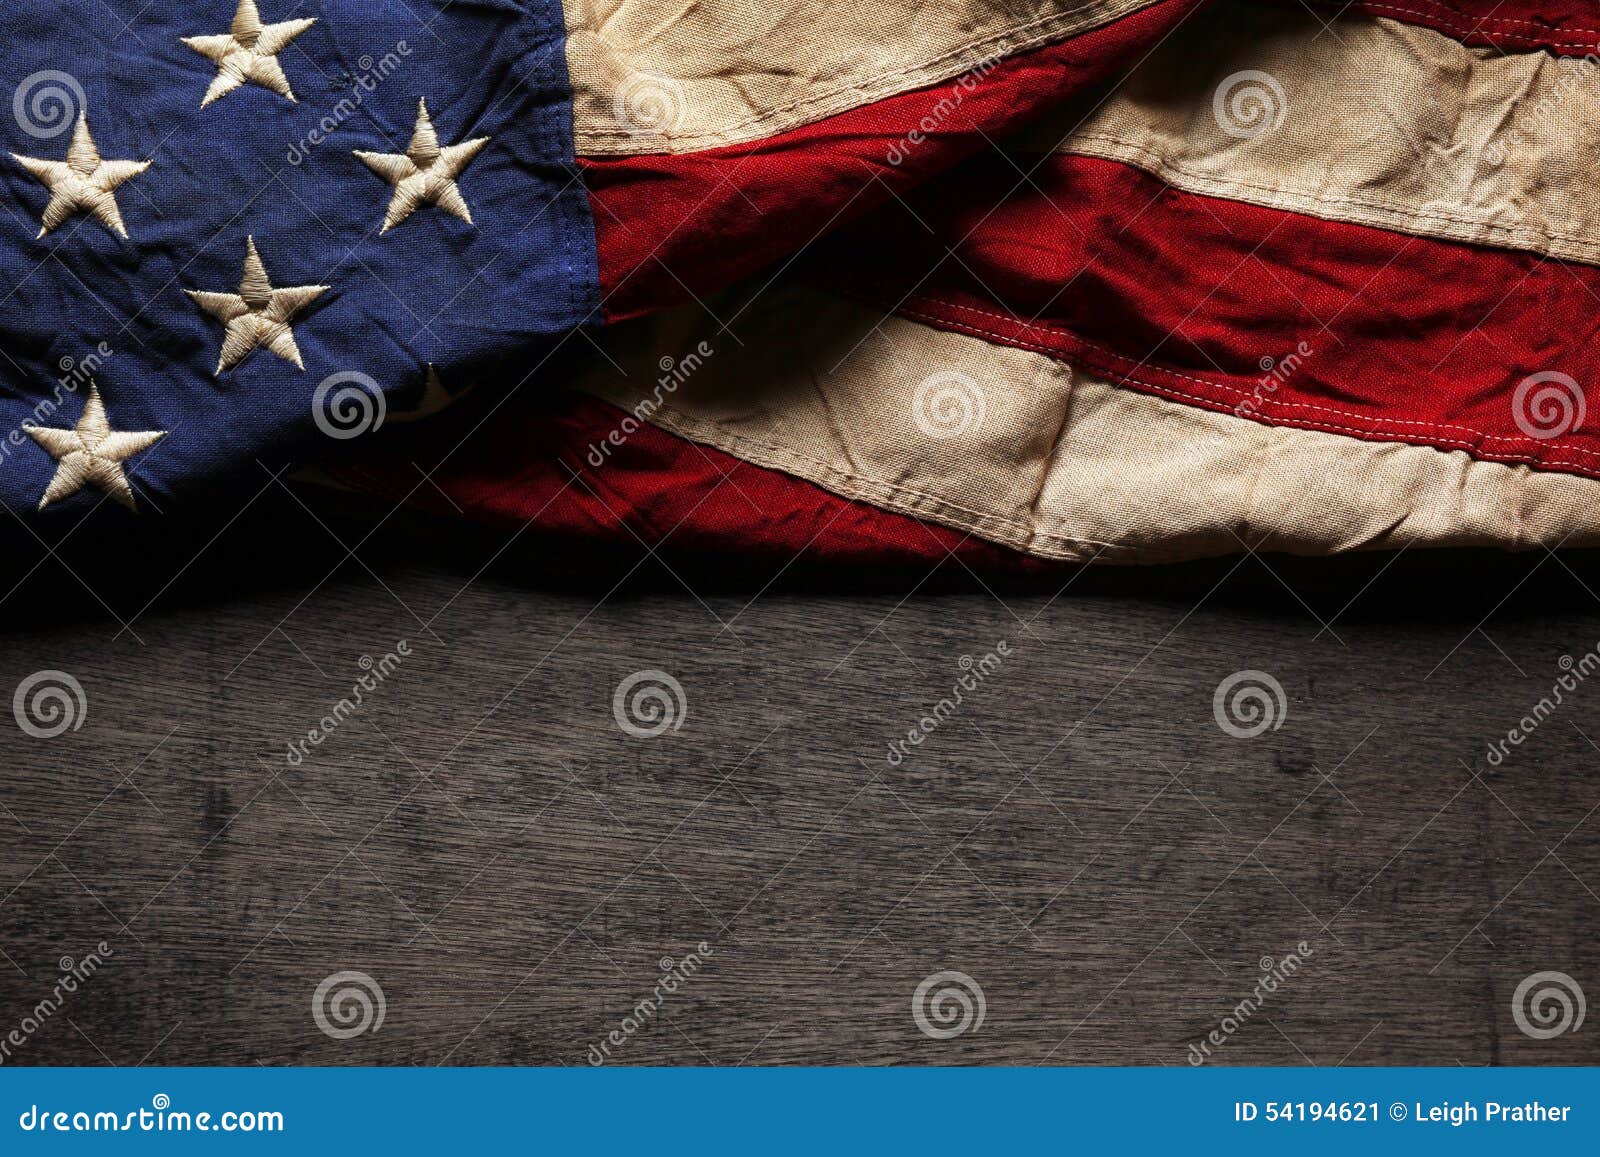 old and worn american flag